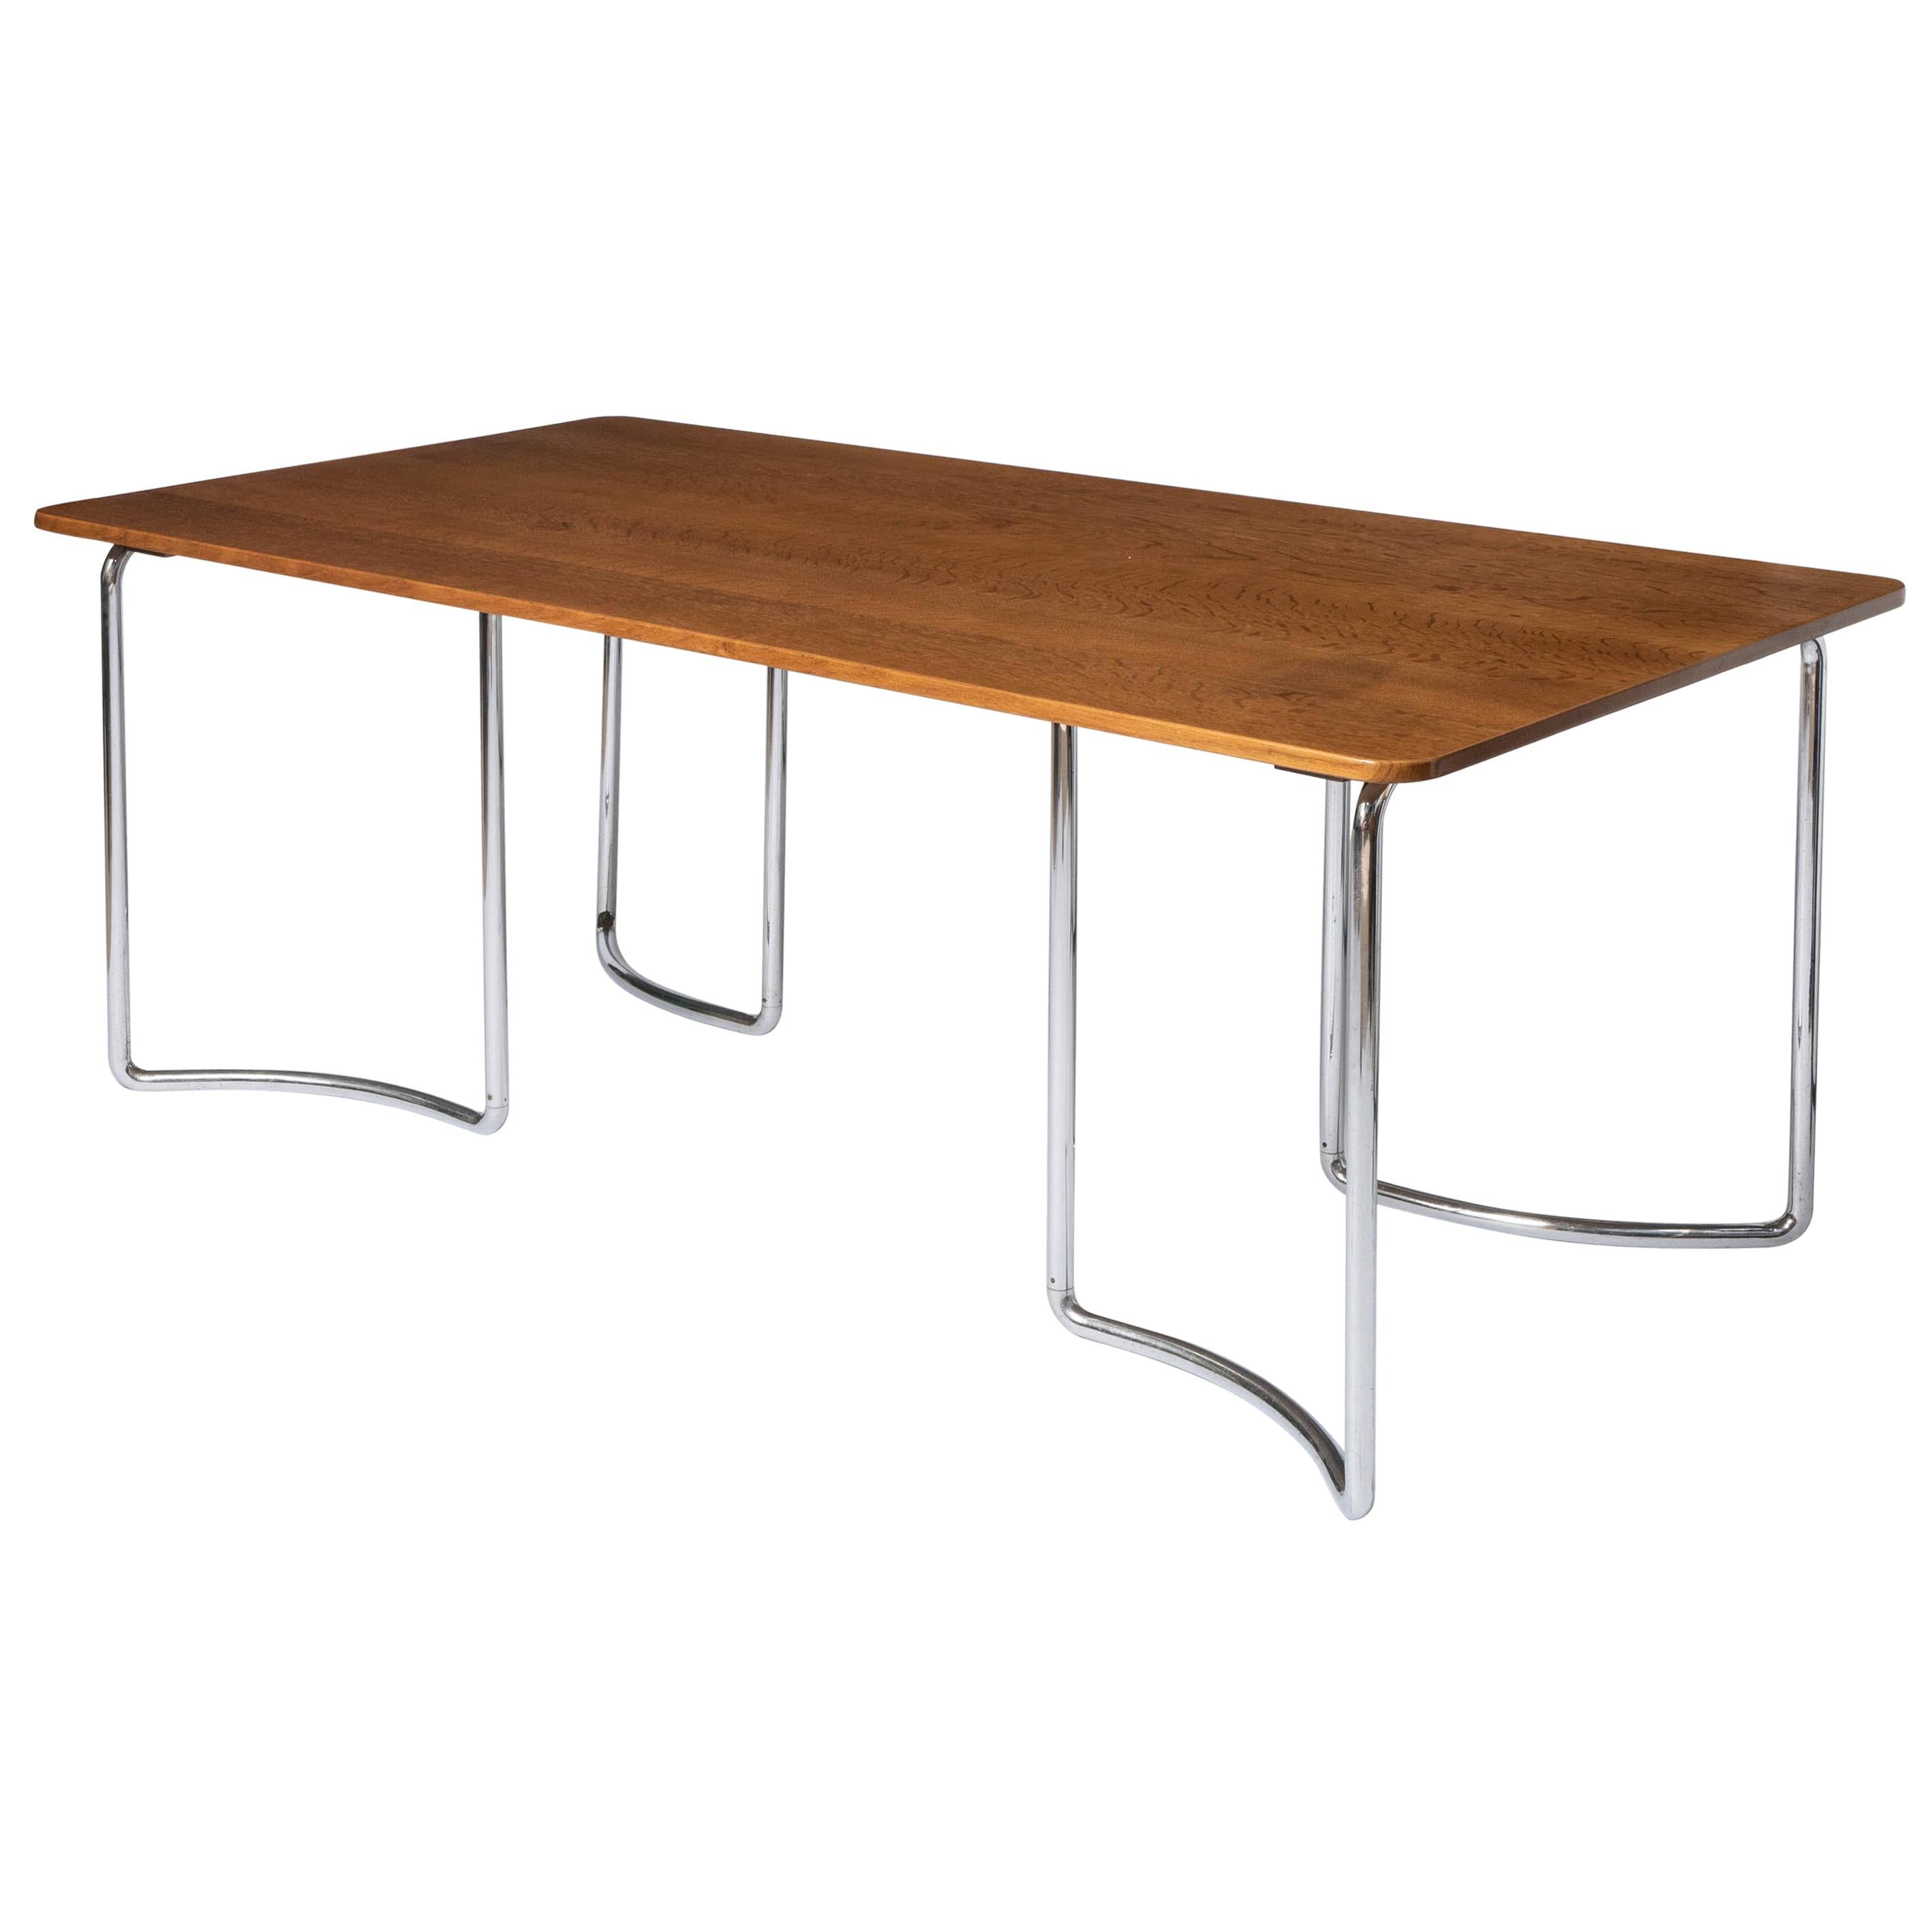 P.E.L. British Modernist Dining Table, England, circa 1931 For Sale